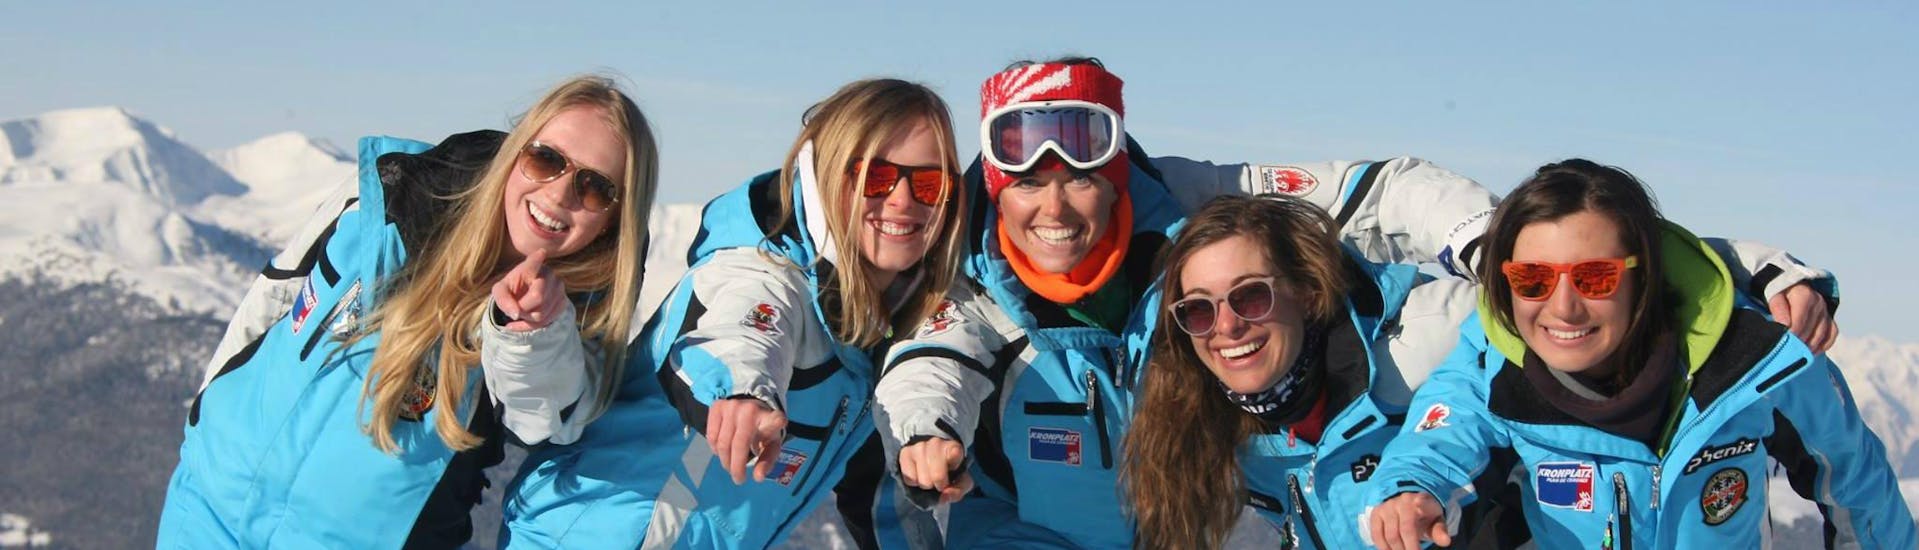 Teen Ski Lessons (13-18 y.) for All Levels with Kronschool Valdaora - Hero image